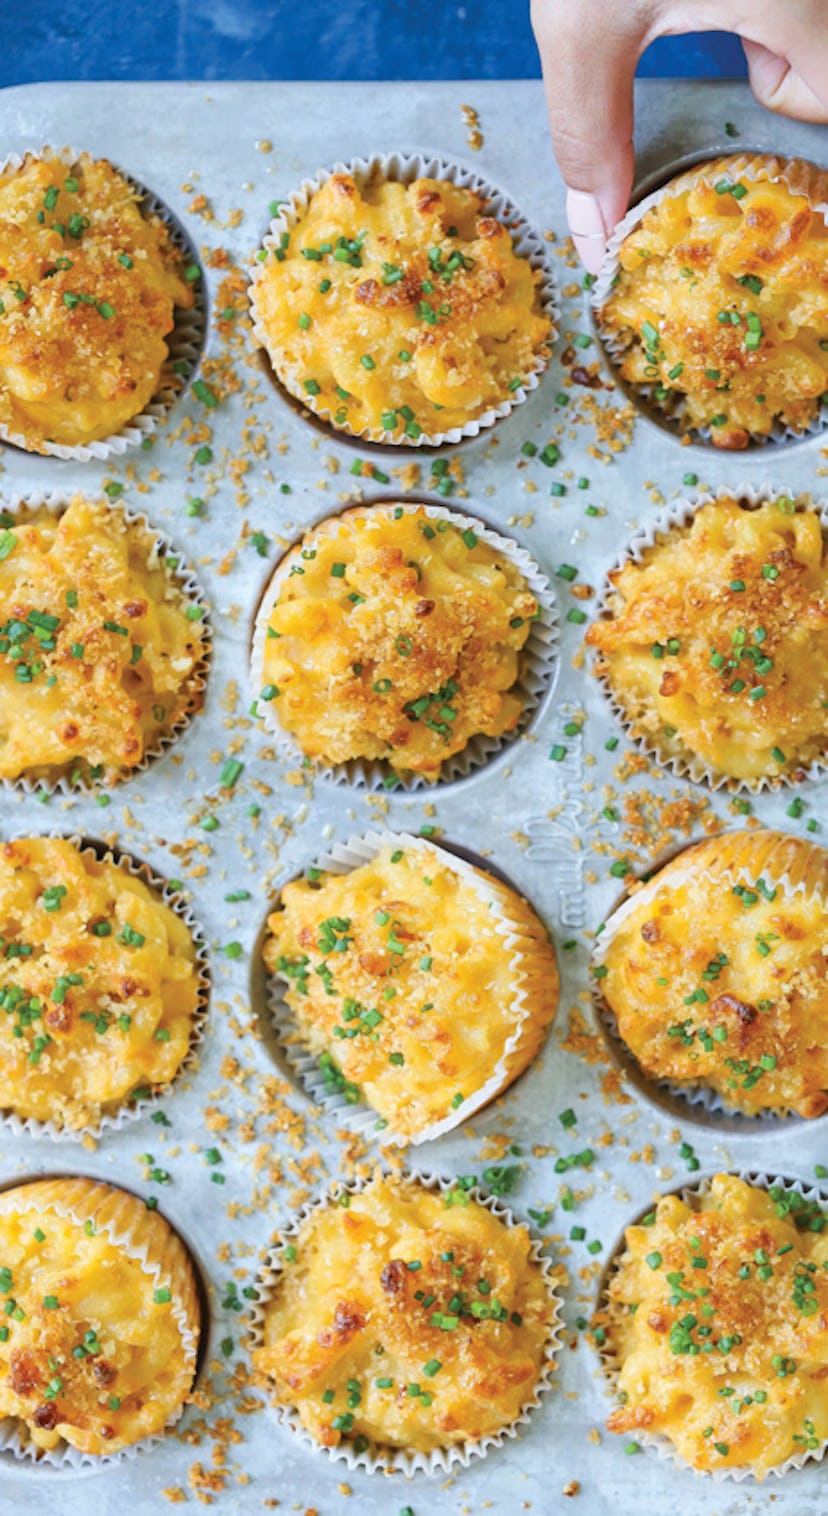 Mac and cheese cups are an easy toddler lunch idea.